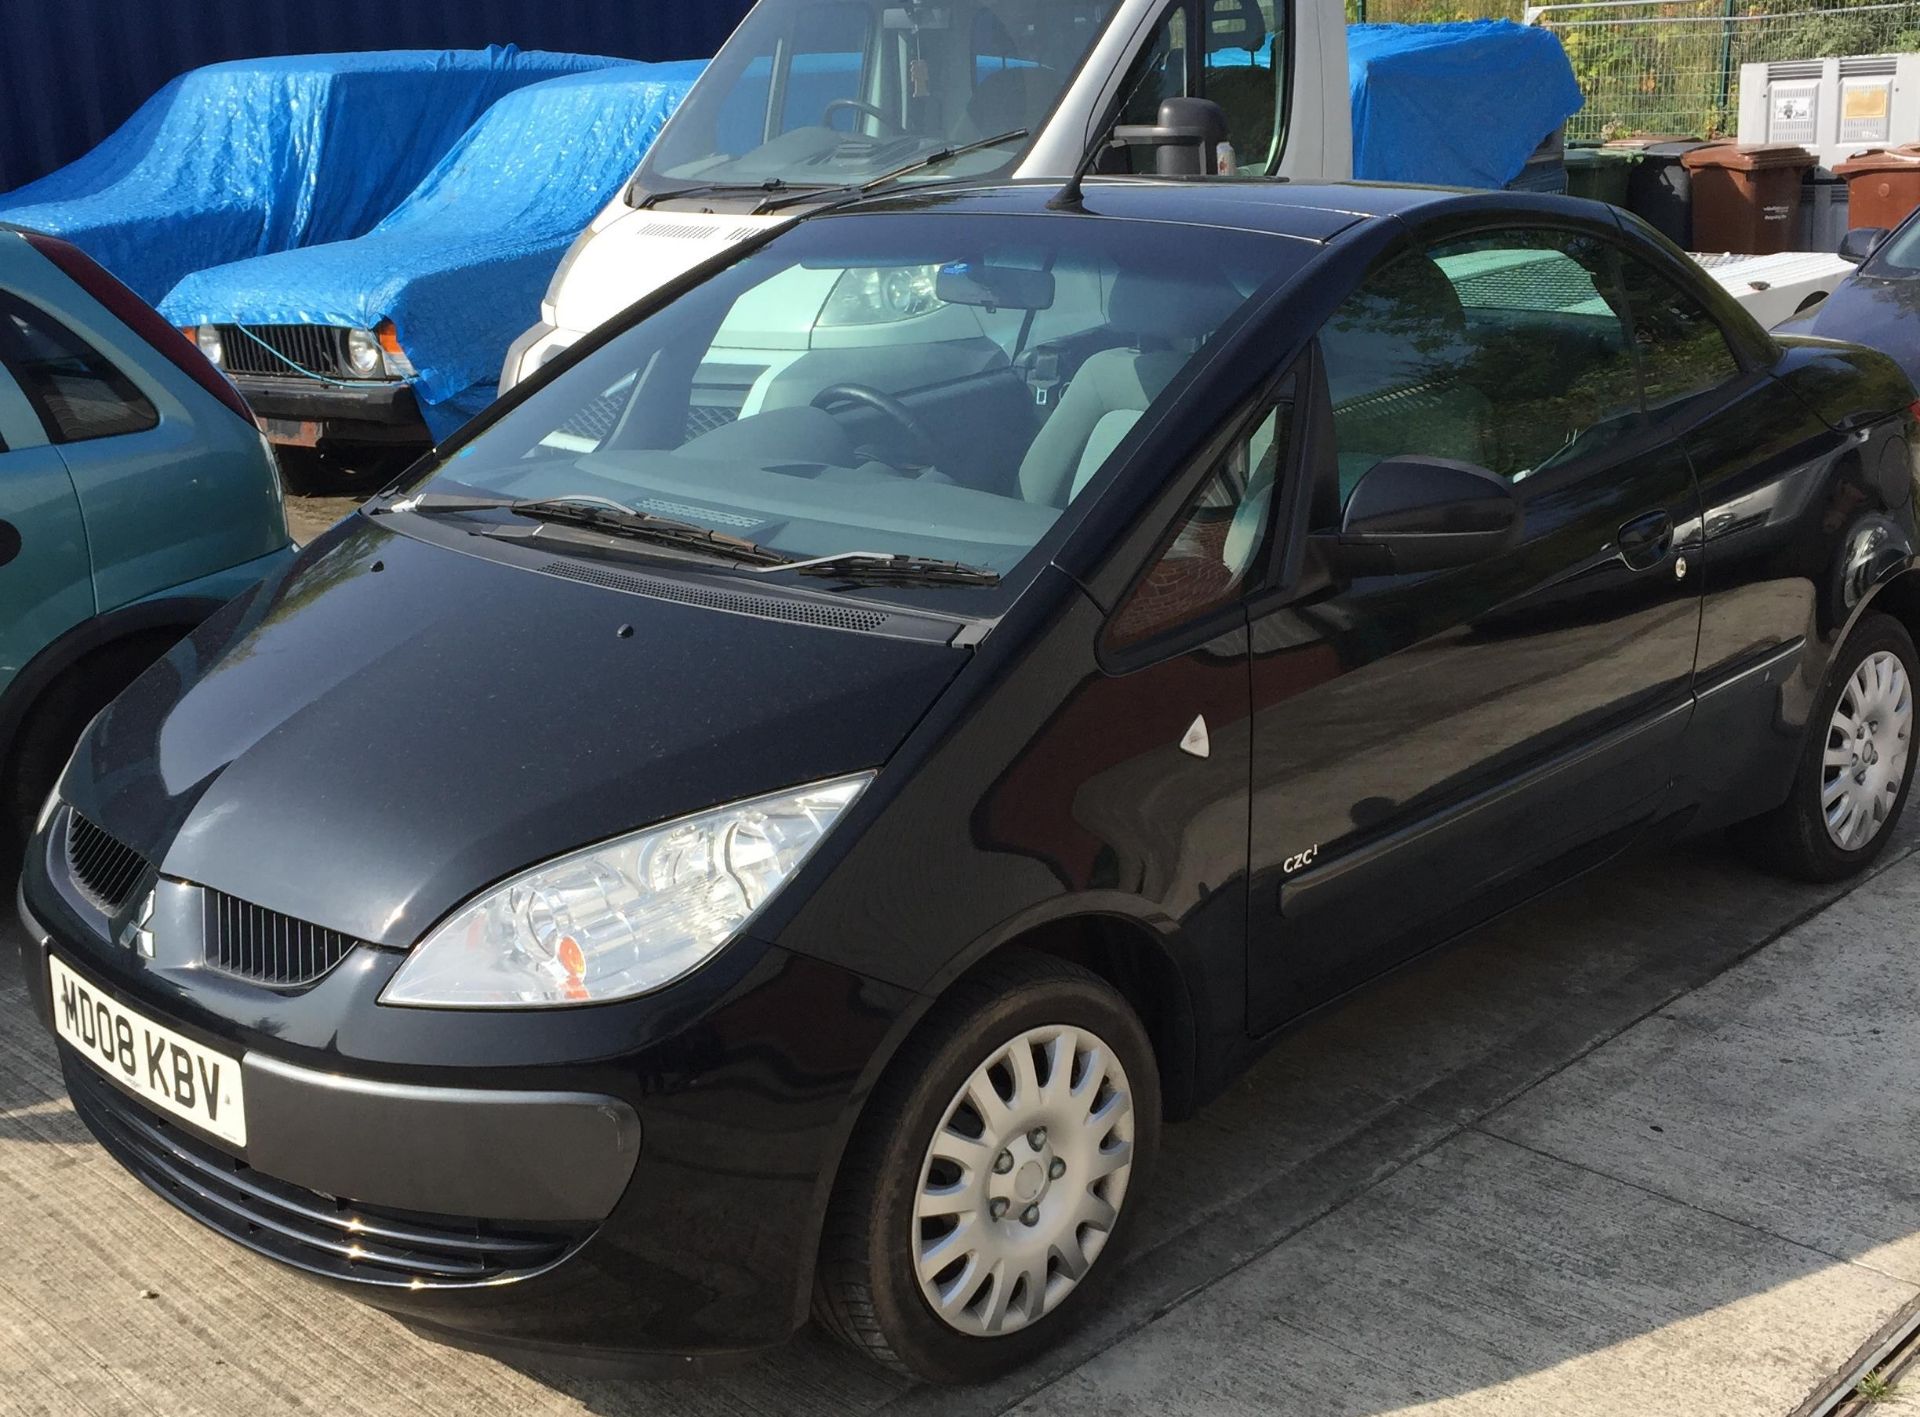 MITSUBISHI COLT 1.5 CZC1 CONVERTIBLE - petrol - black. On instructions of a retained client. - Image 2 of 6